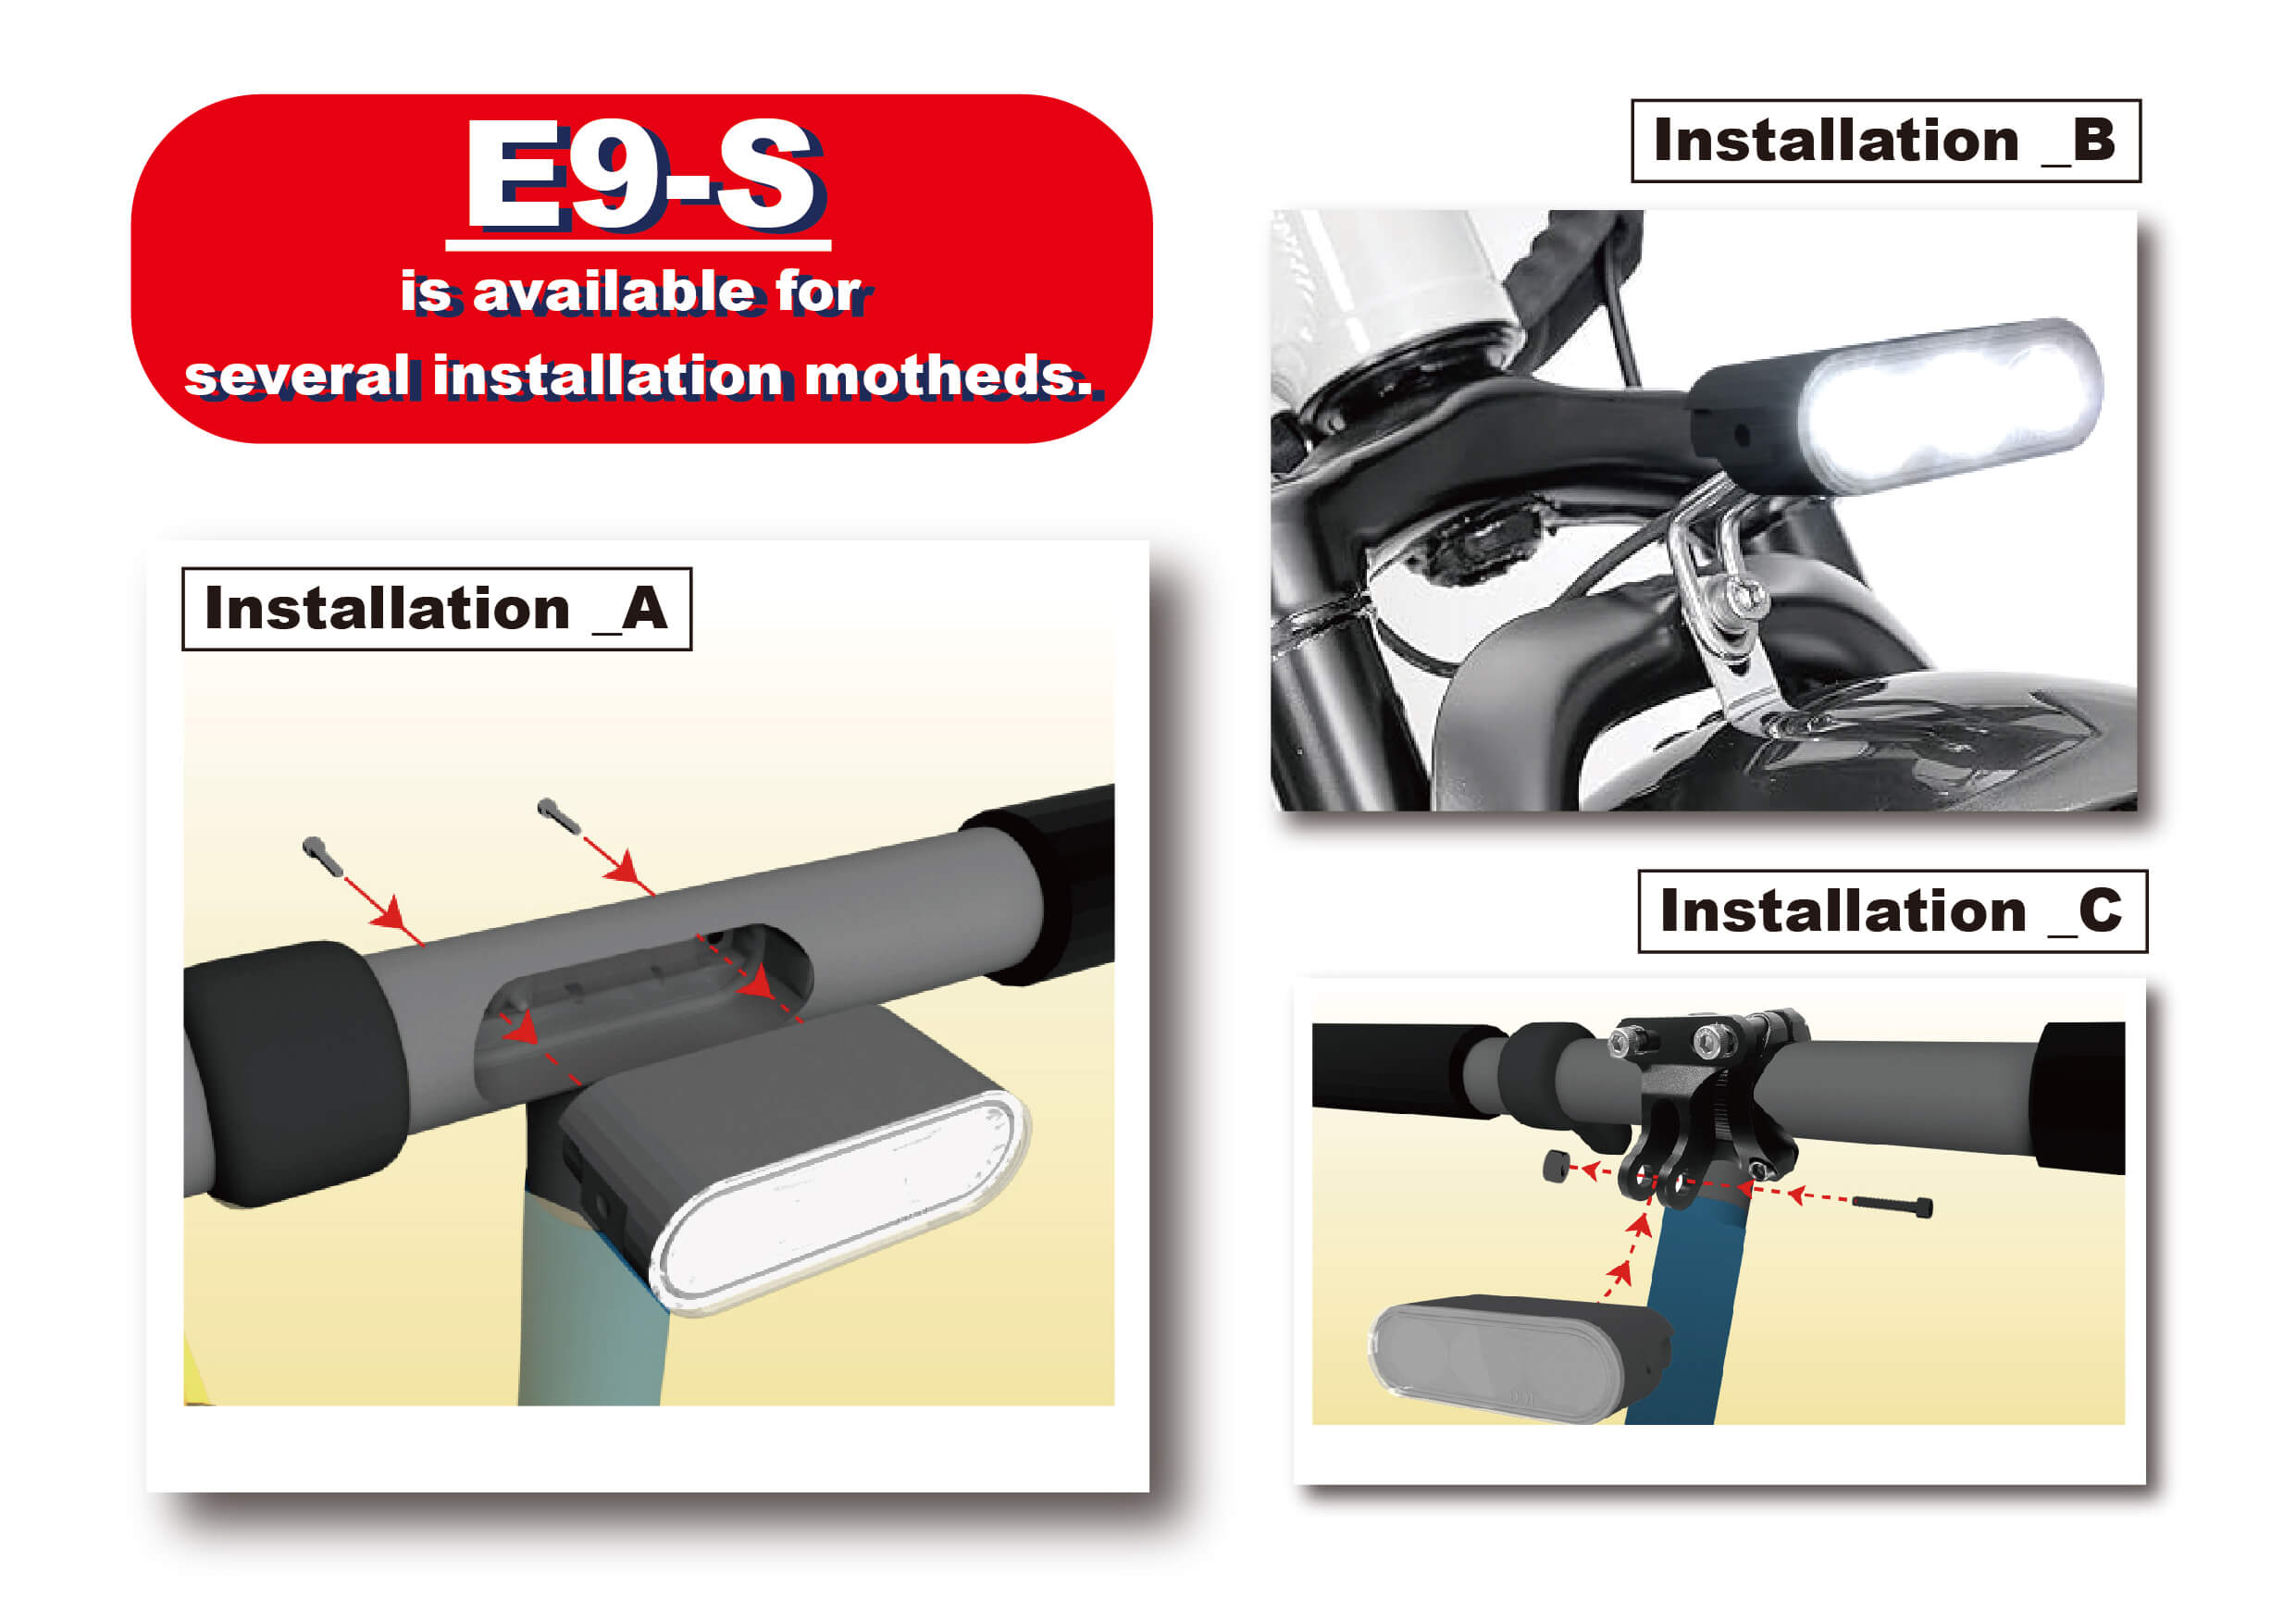 Ebike Light E-MARK DARKBUSTER E9S is available for several installation motheds